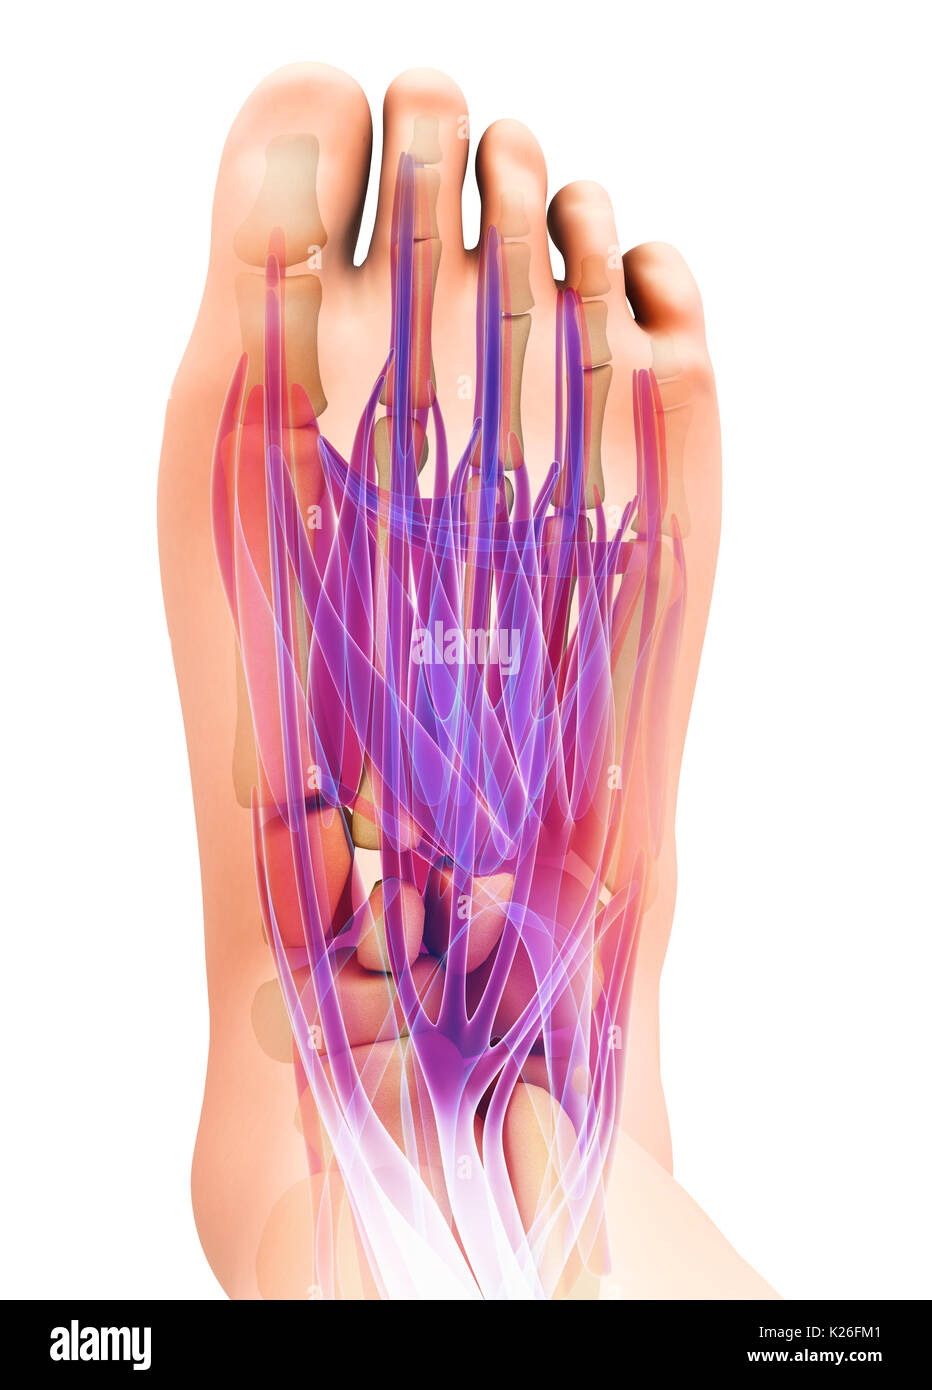 3d illustration of Medical and Scientific concept, Foot muscle - human muscular system. Stock Photo